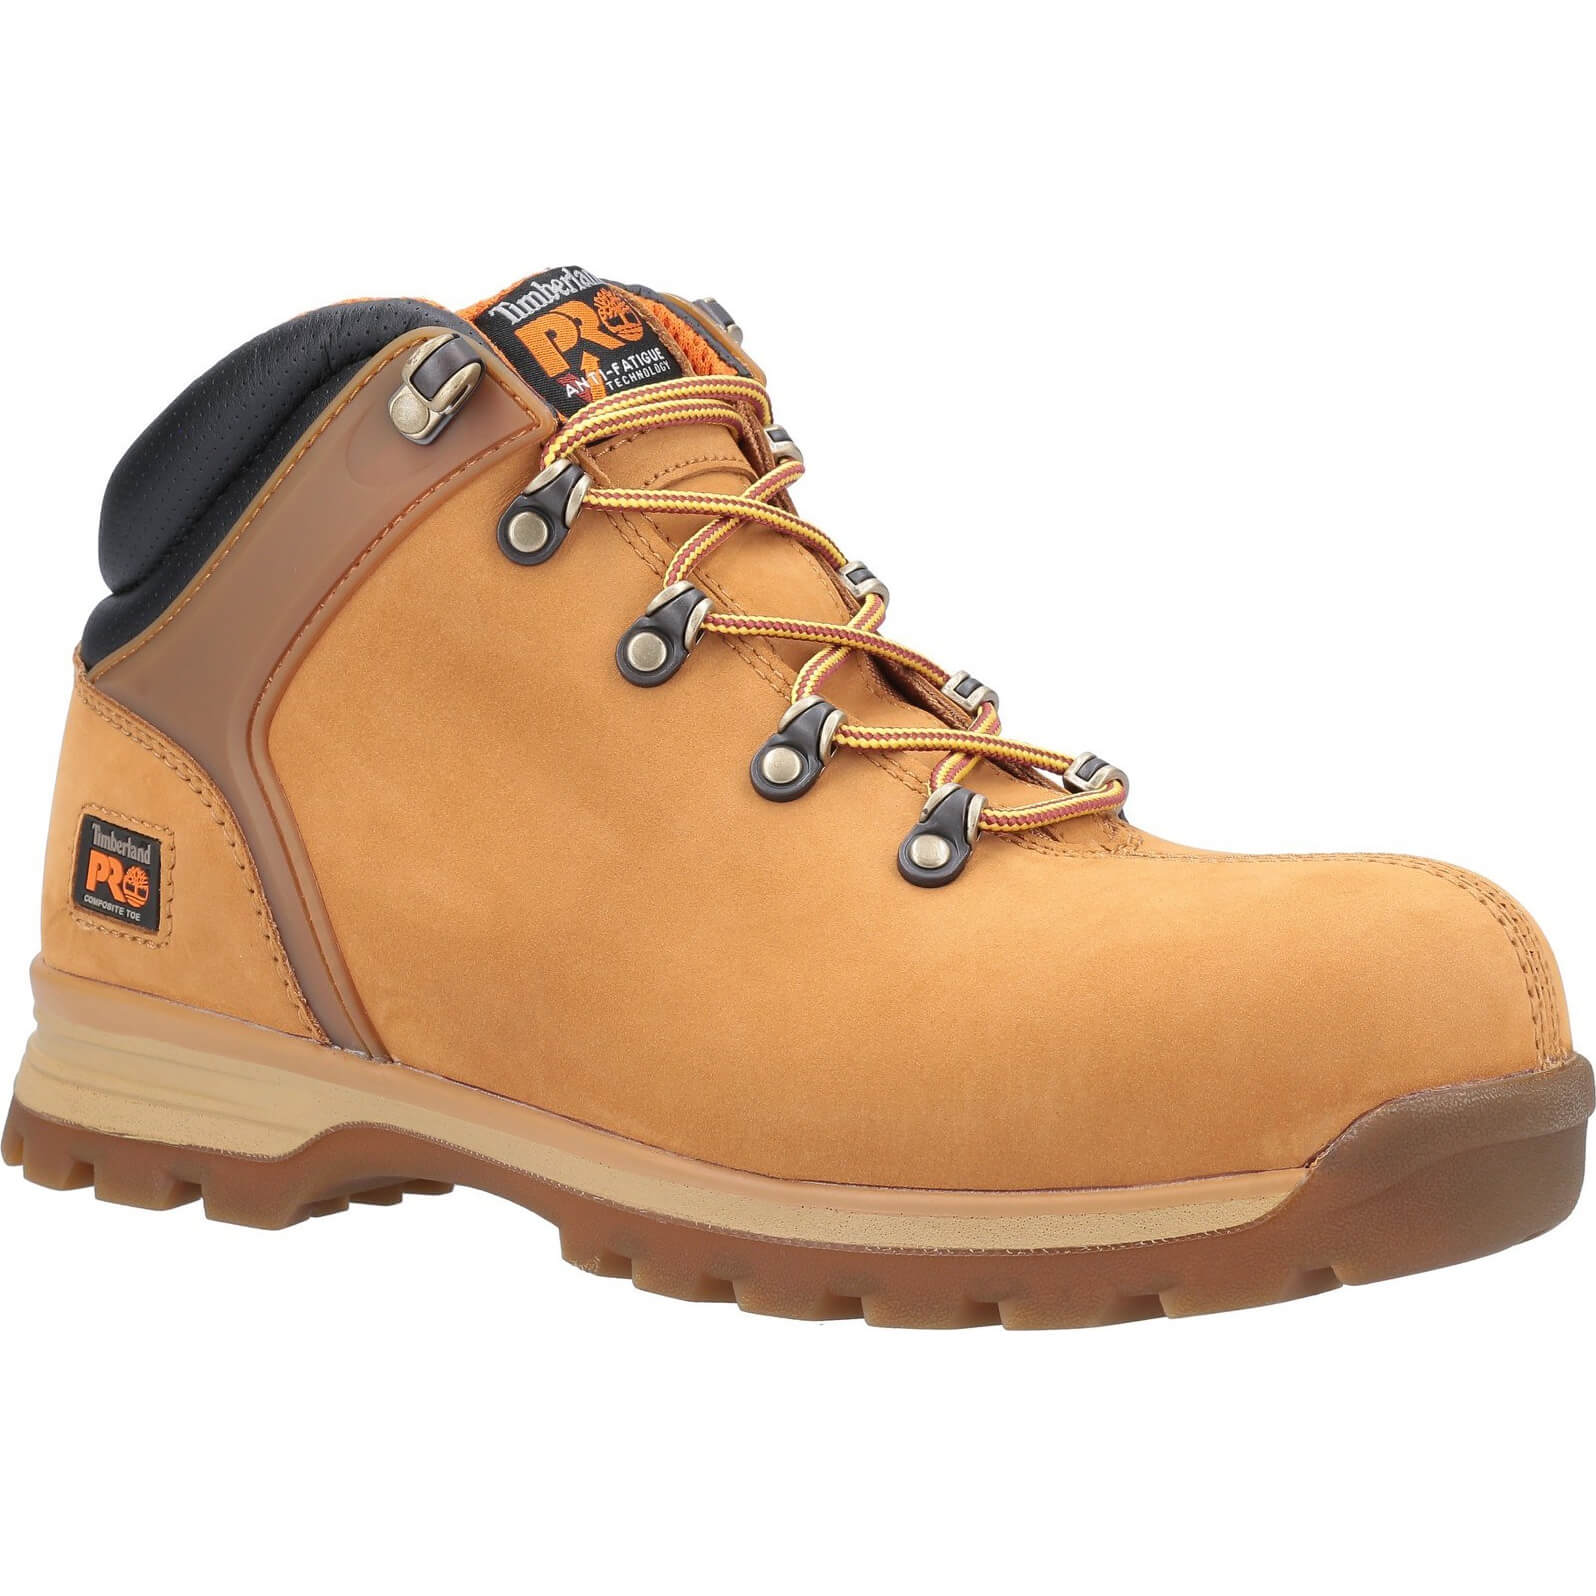 Image of Timberland Pro Splitrock XT Composite Safety Toe Work Boot Wheat Size 14